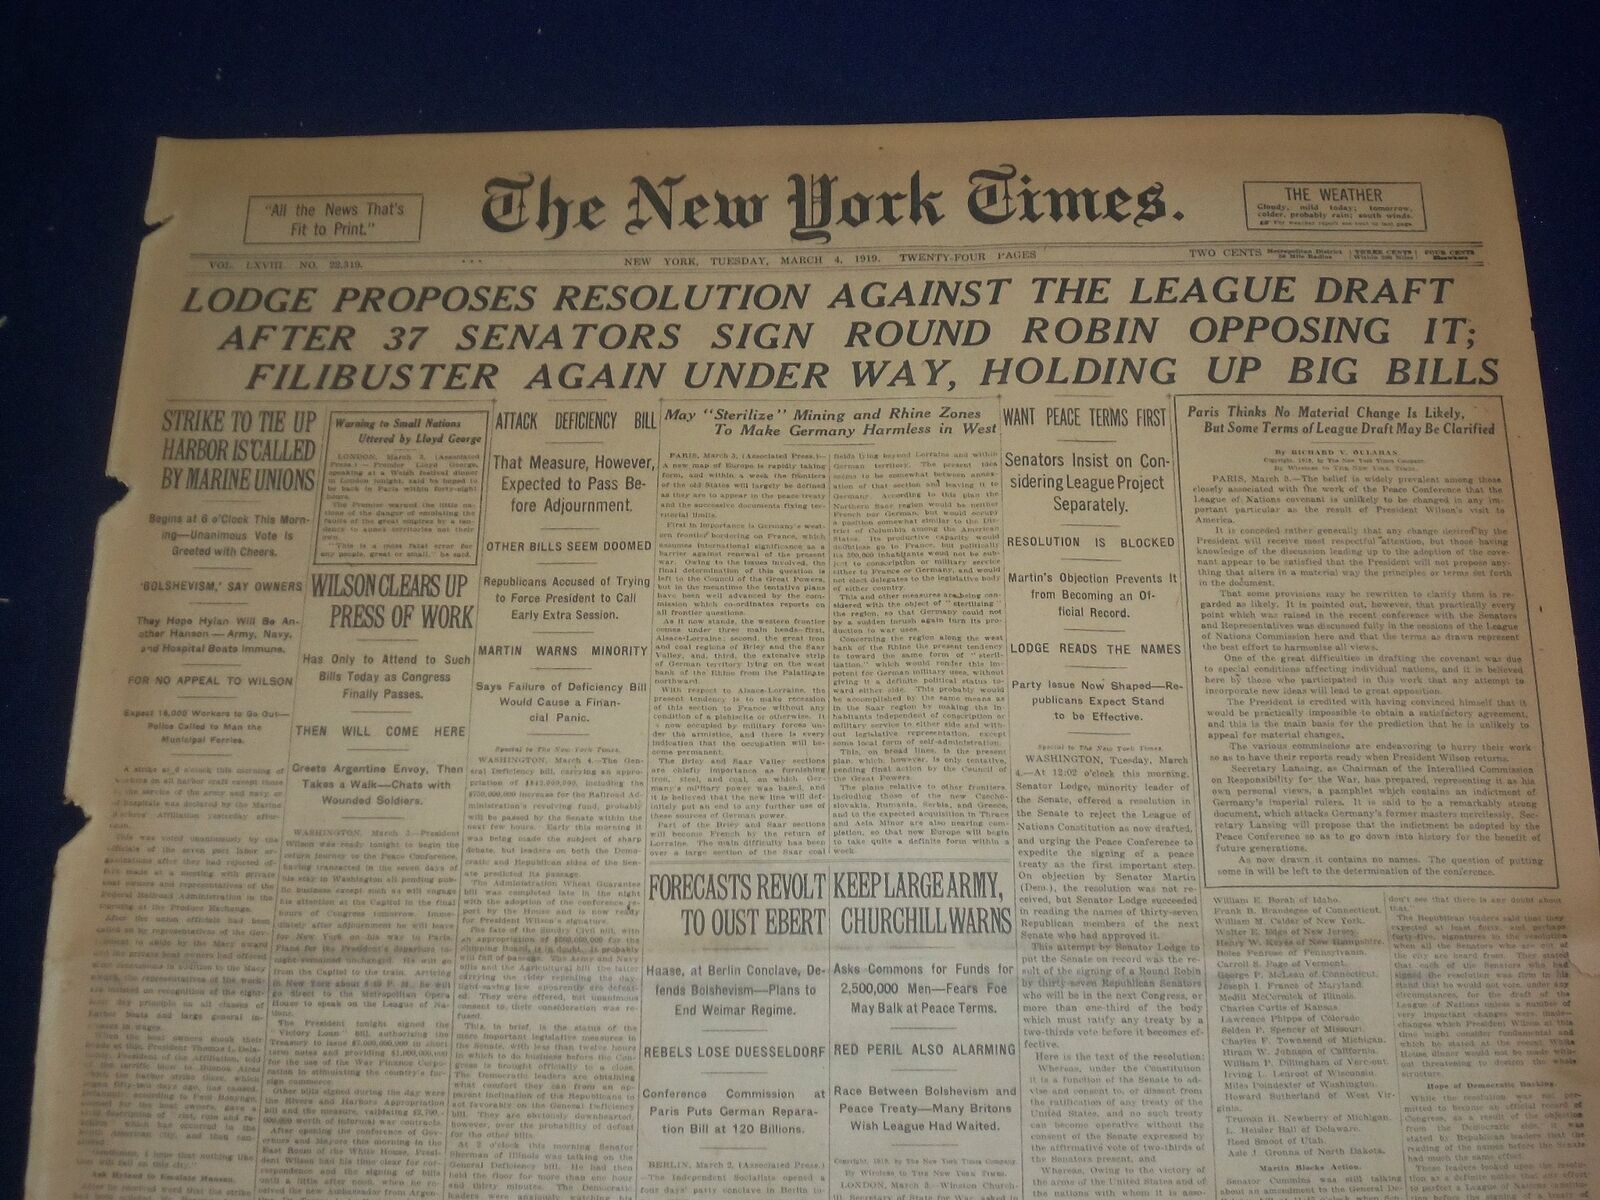 1919 MARCH 4 N. Y. TIMES-LODGE PROPOSES RESOLUTION AGAINST LEAGUE DRAFT- NT 9265